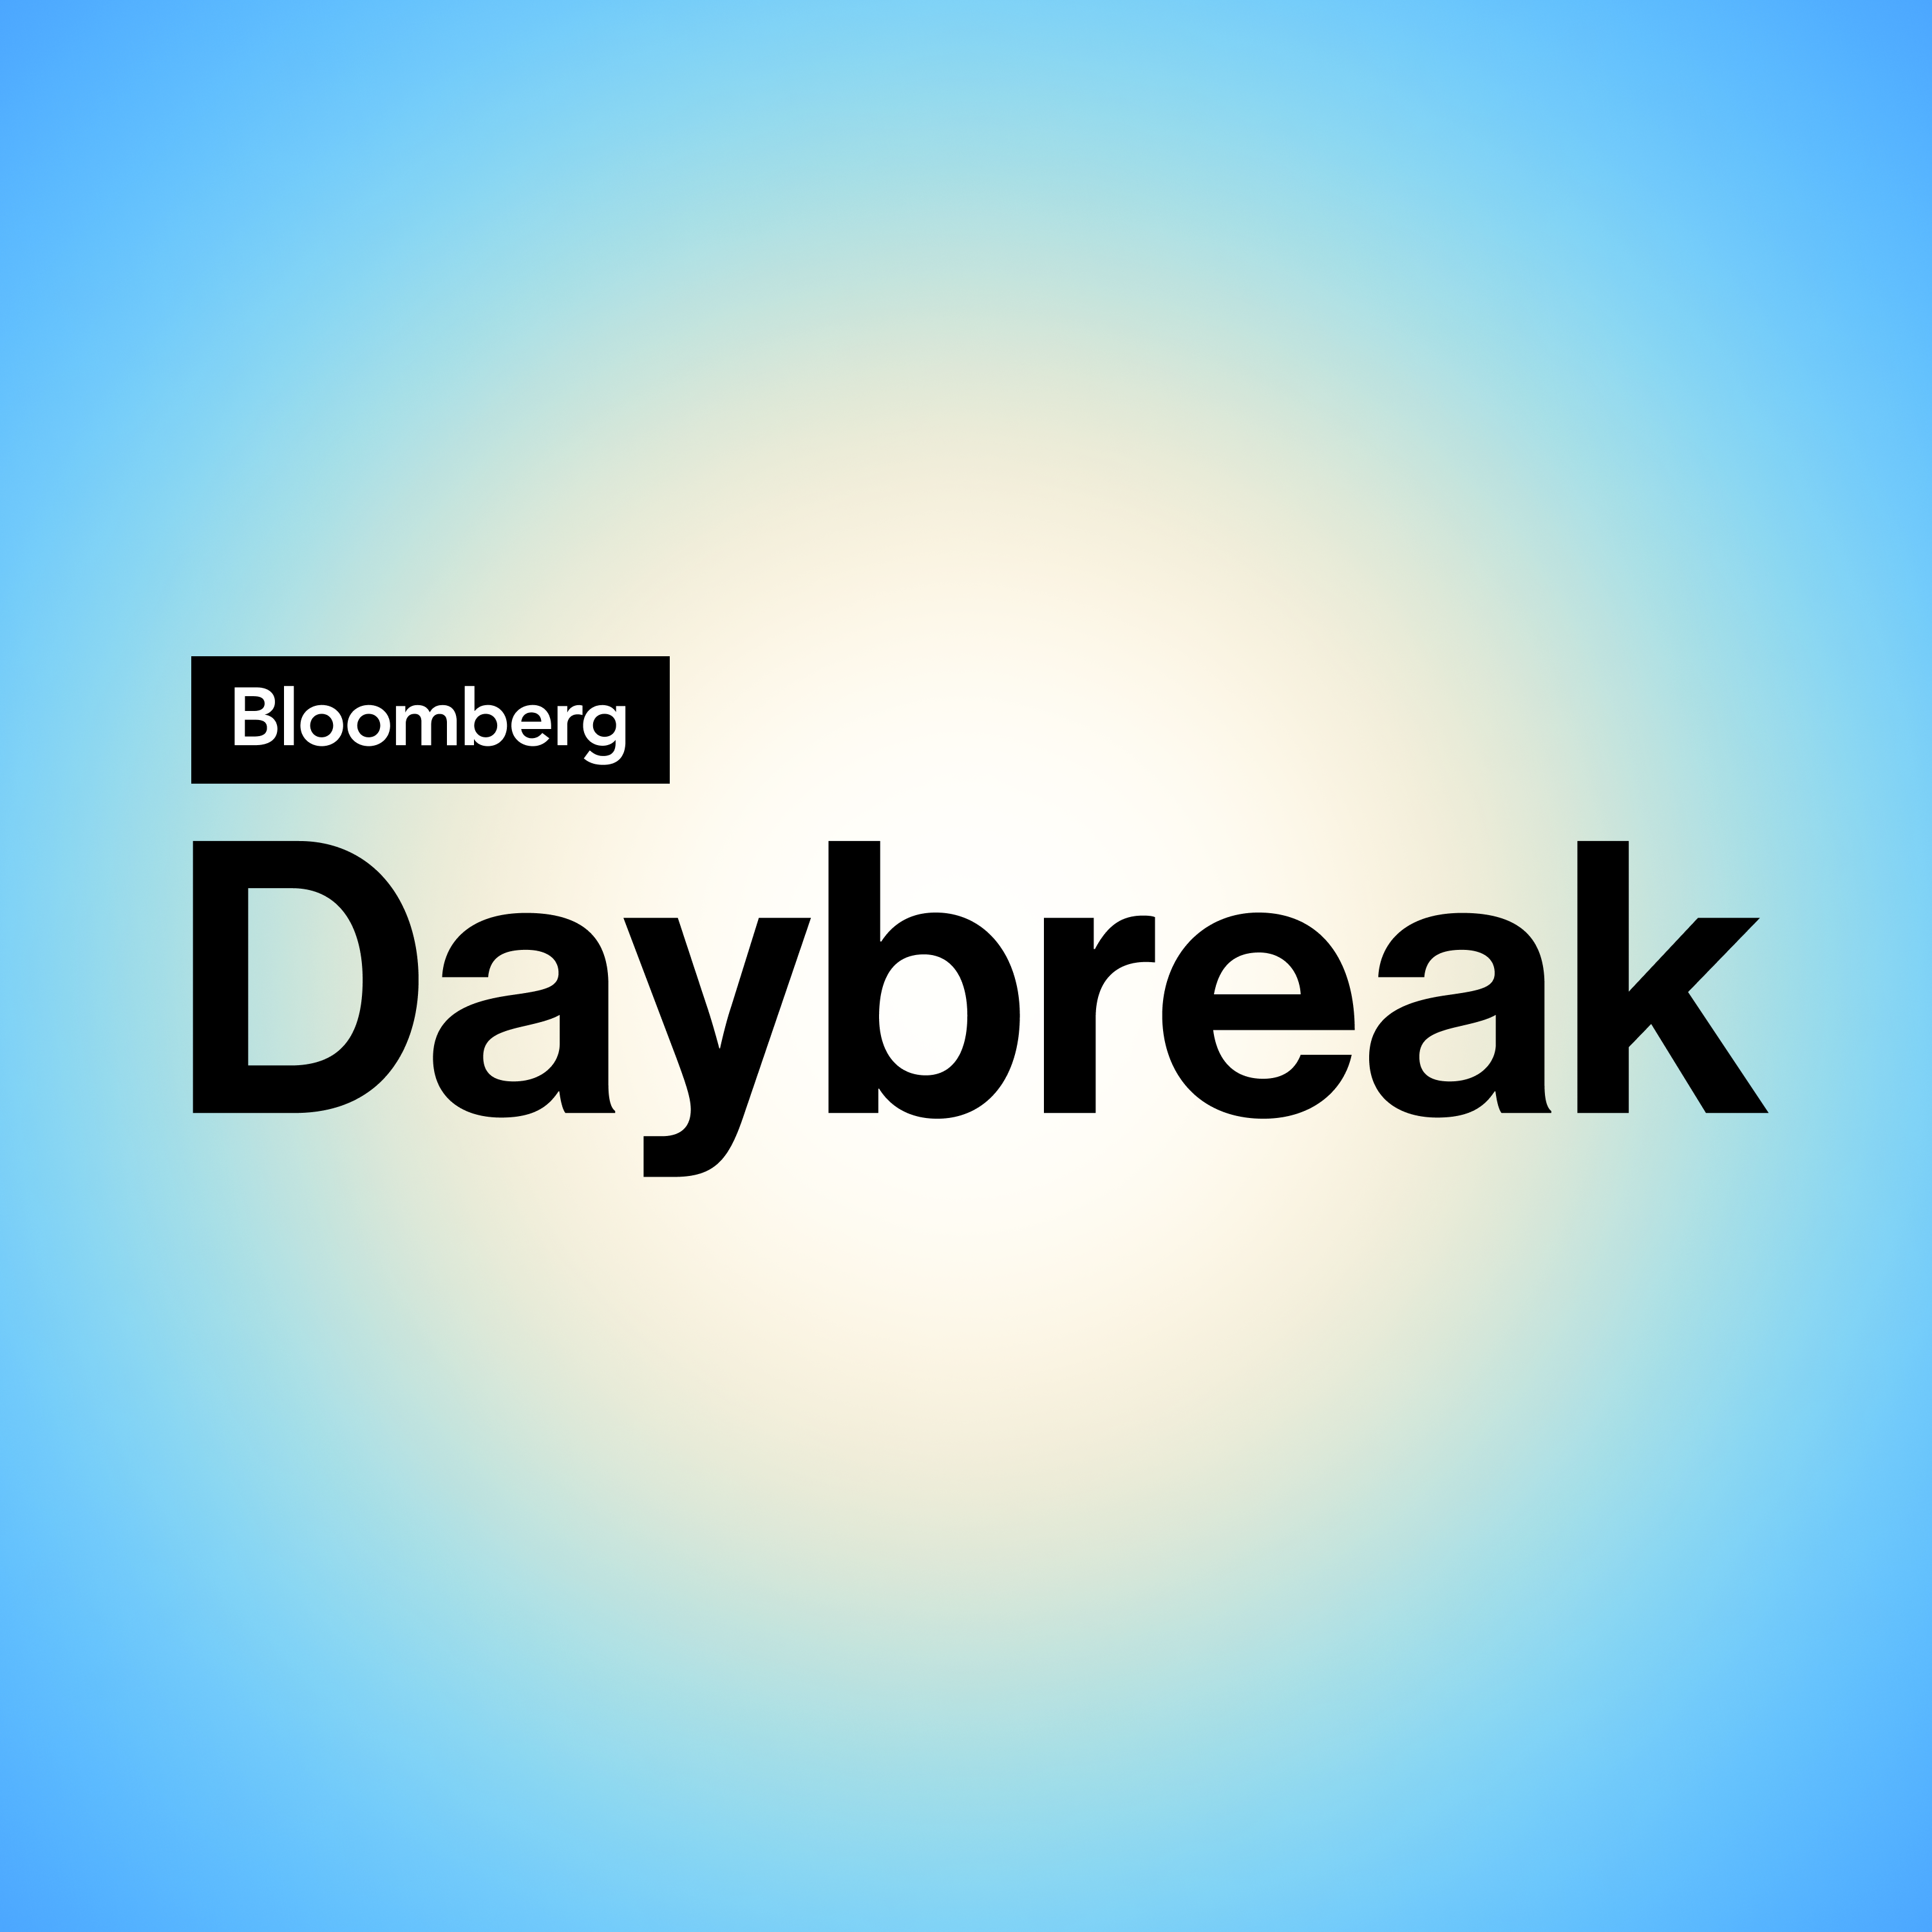 Daybreak Holiday: Markets, Fed Policy, Travel Tips